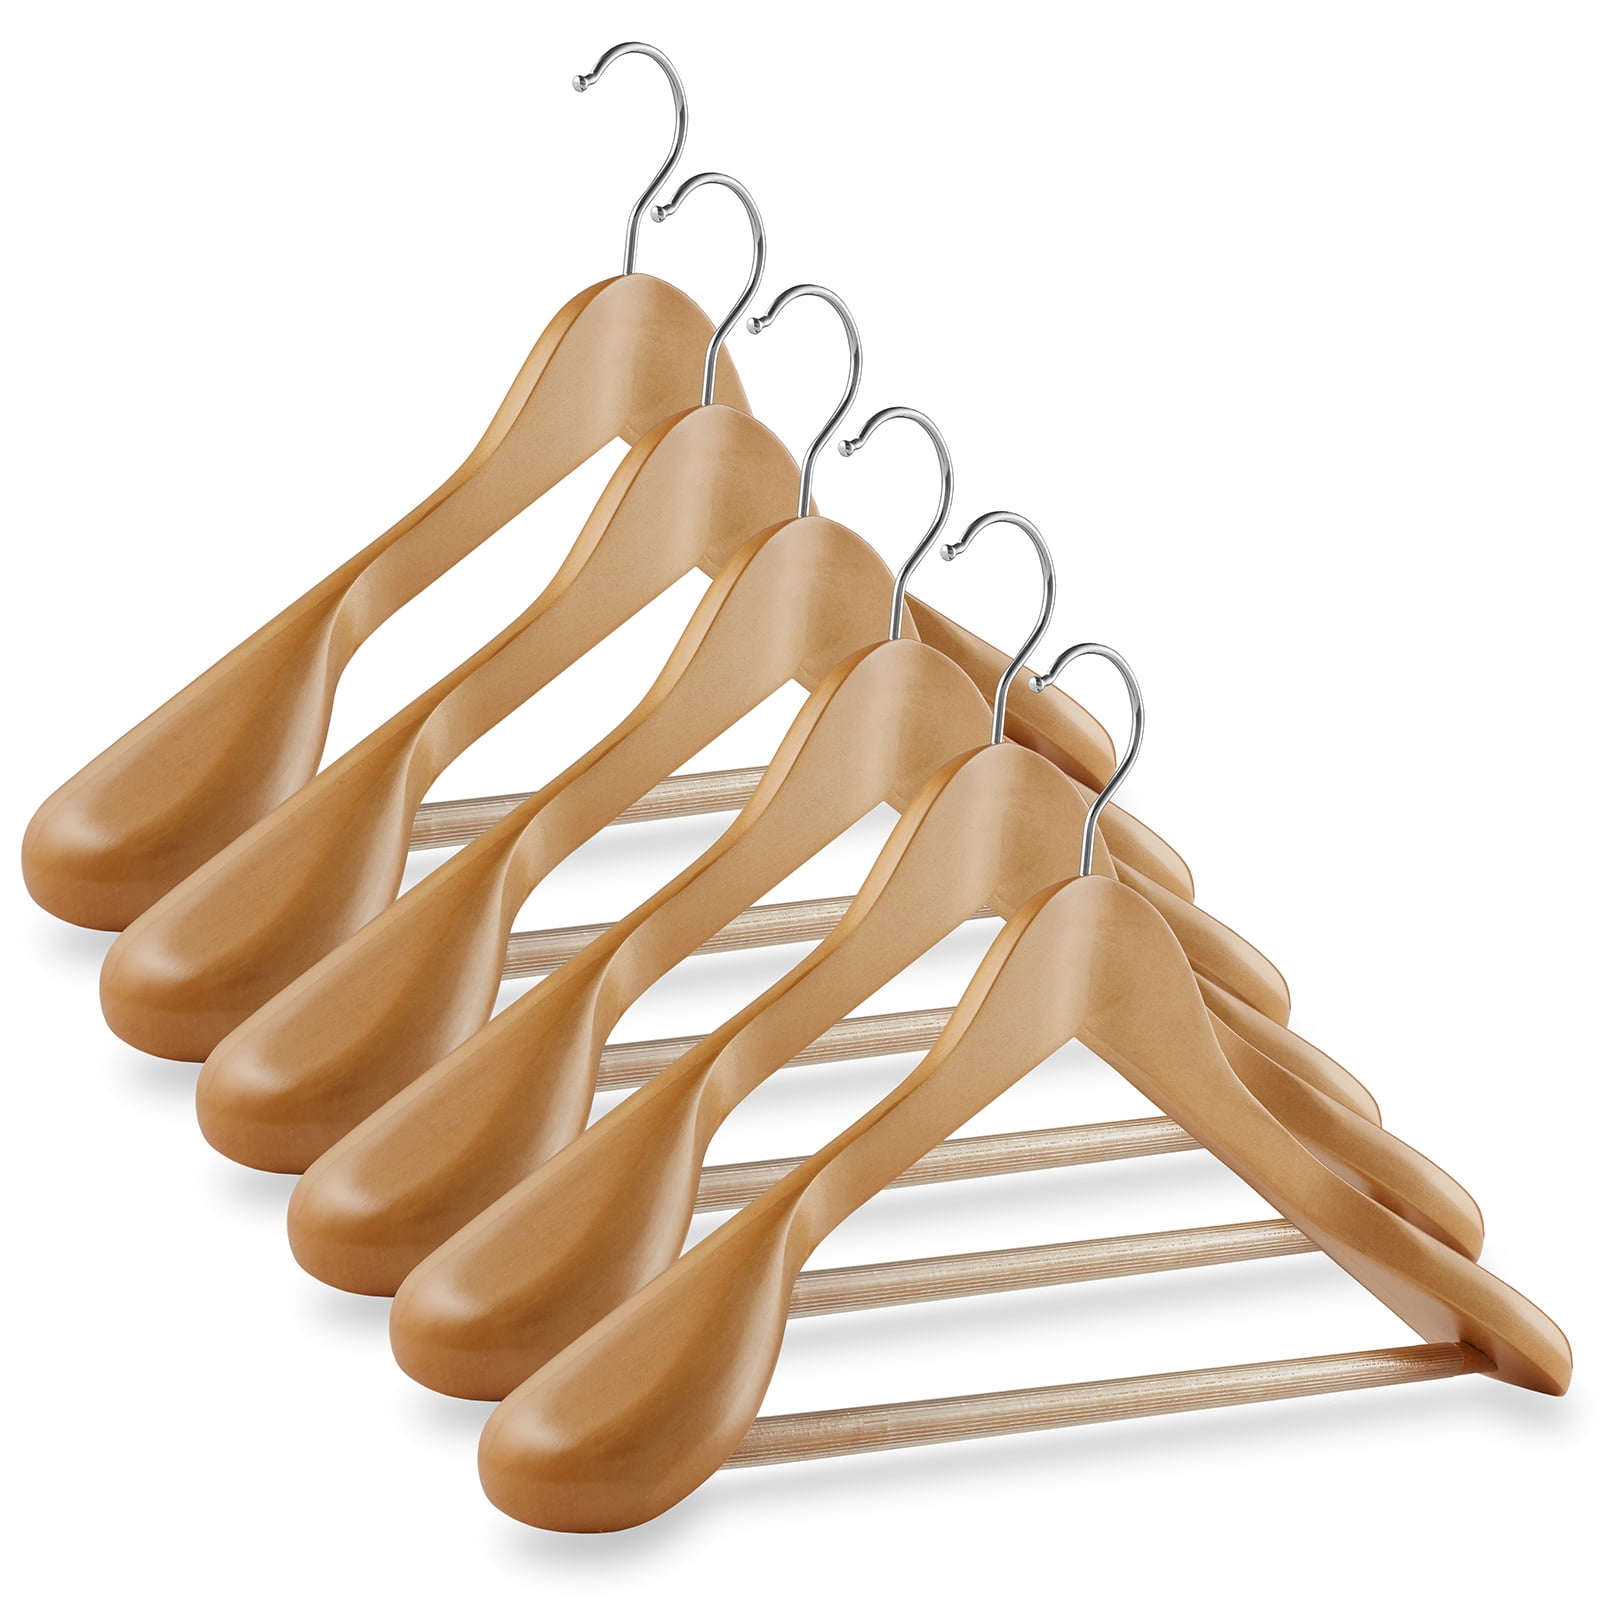 The Hanger Store 6 Wooden Suit Hangers With Broad Ends and Non-Slip Trouser Bar 